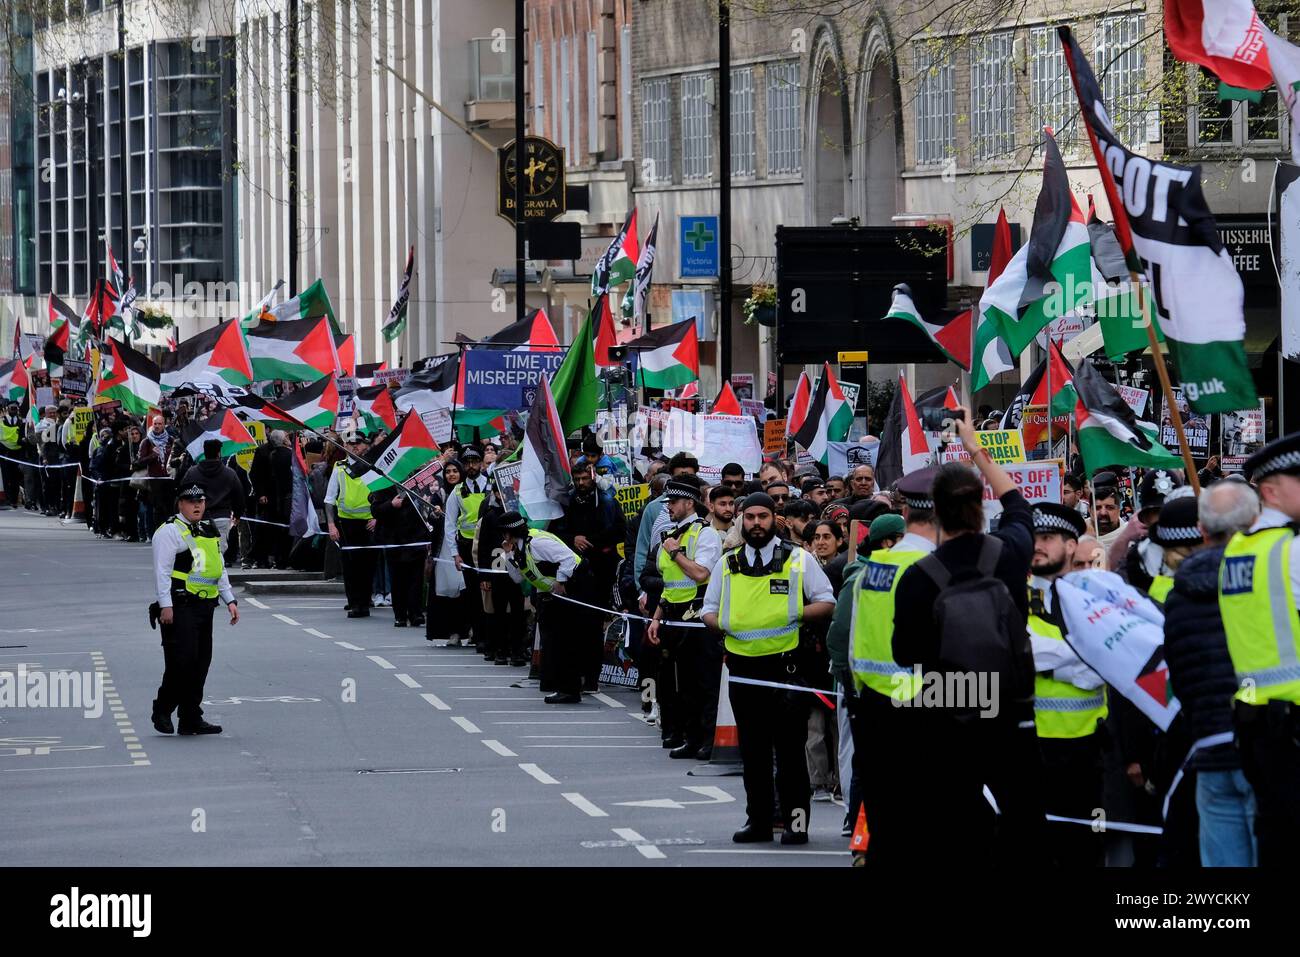 London, UK, 5th April, 2024. The annual Al Quds Day march took place in solidarity with Palestinians through central London today. Hundreds bearing placards took part in event from the Home Office to Downing Street. Credit: Eleventh Hour Photography/Alamy Live News Stock Photo